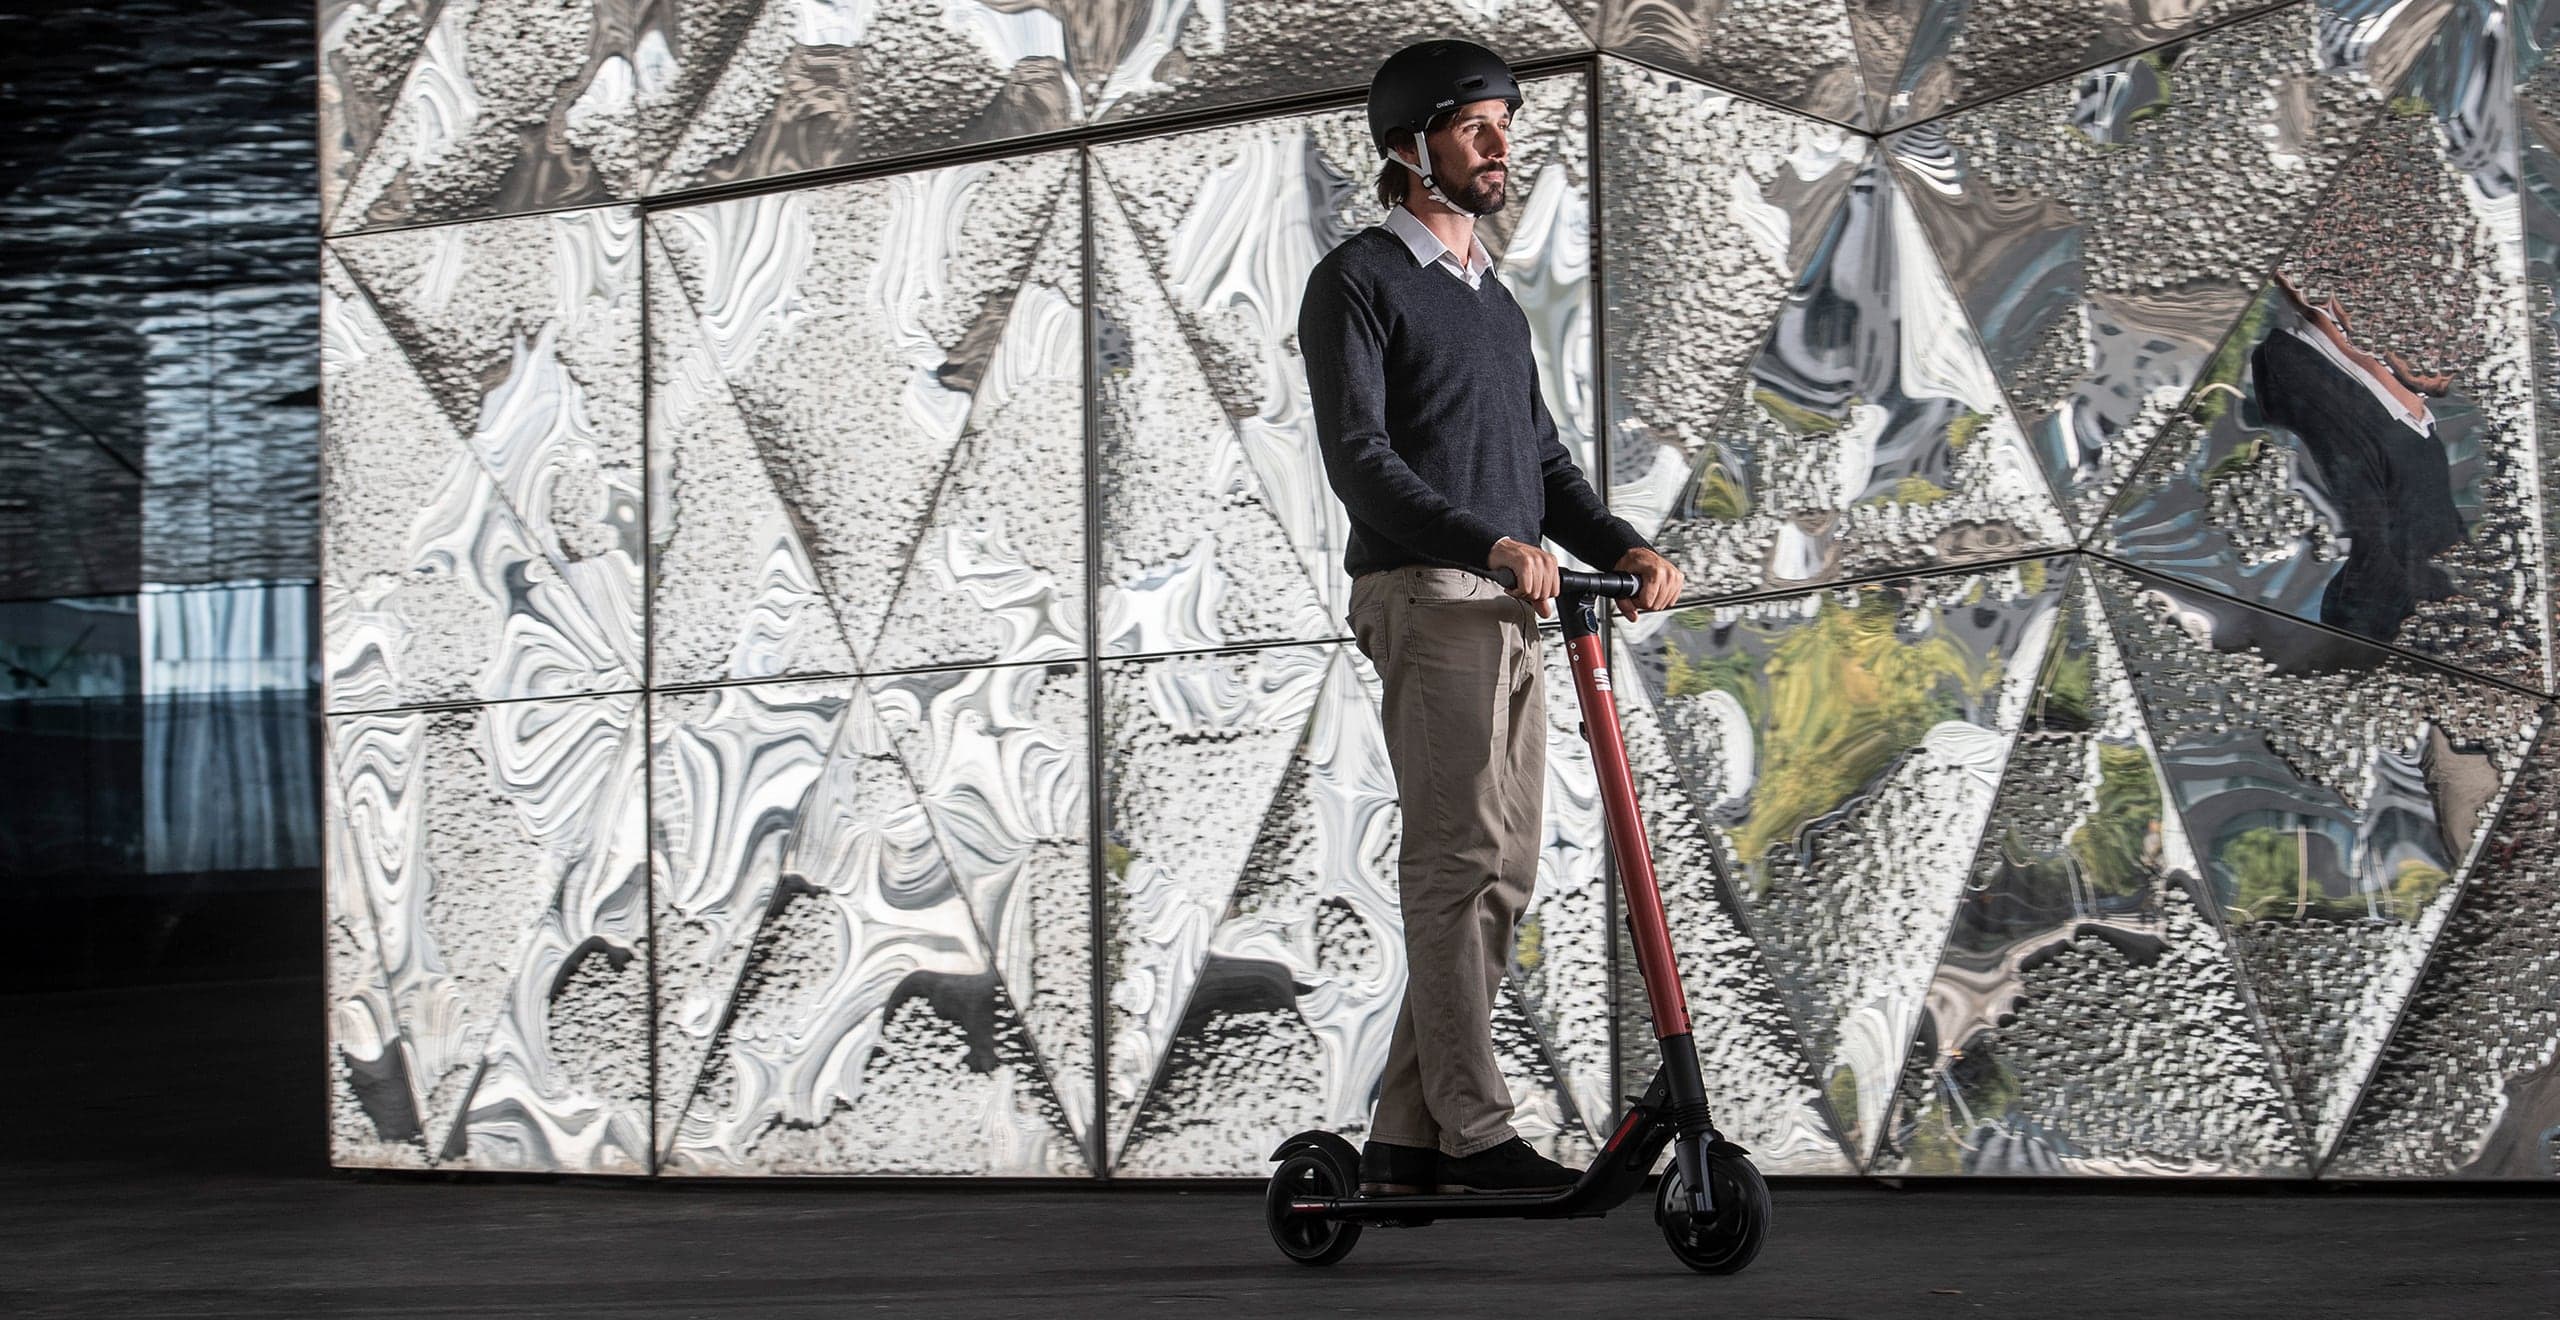 SEAT eXS KickScooter urban mobility solution powered by Segway - Easy city transport